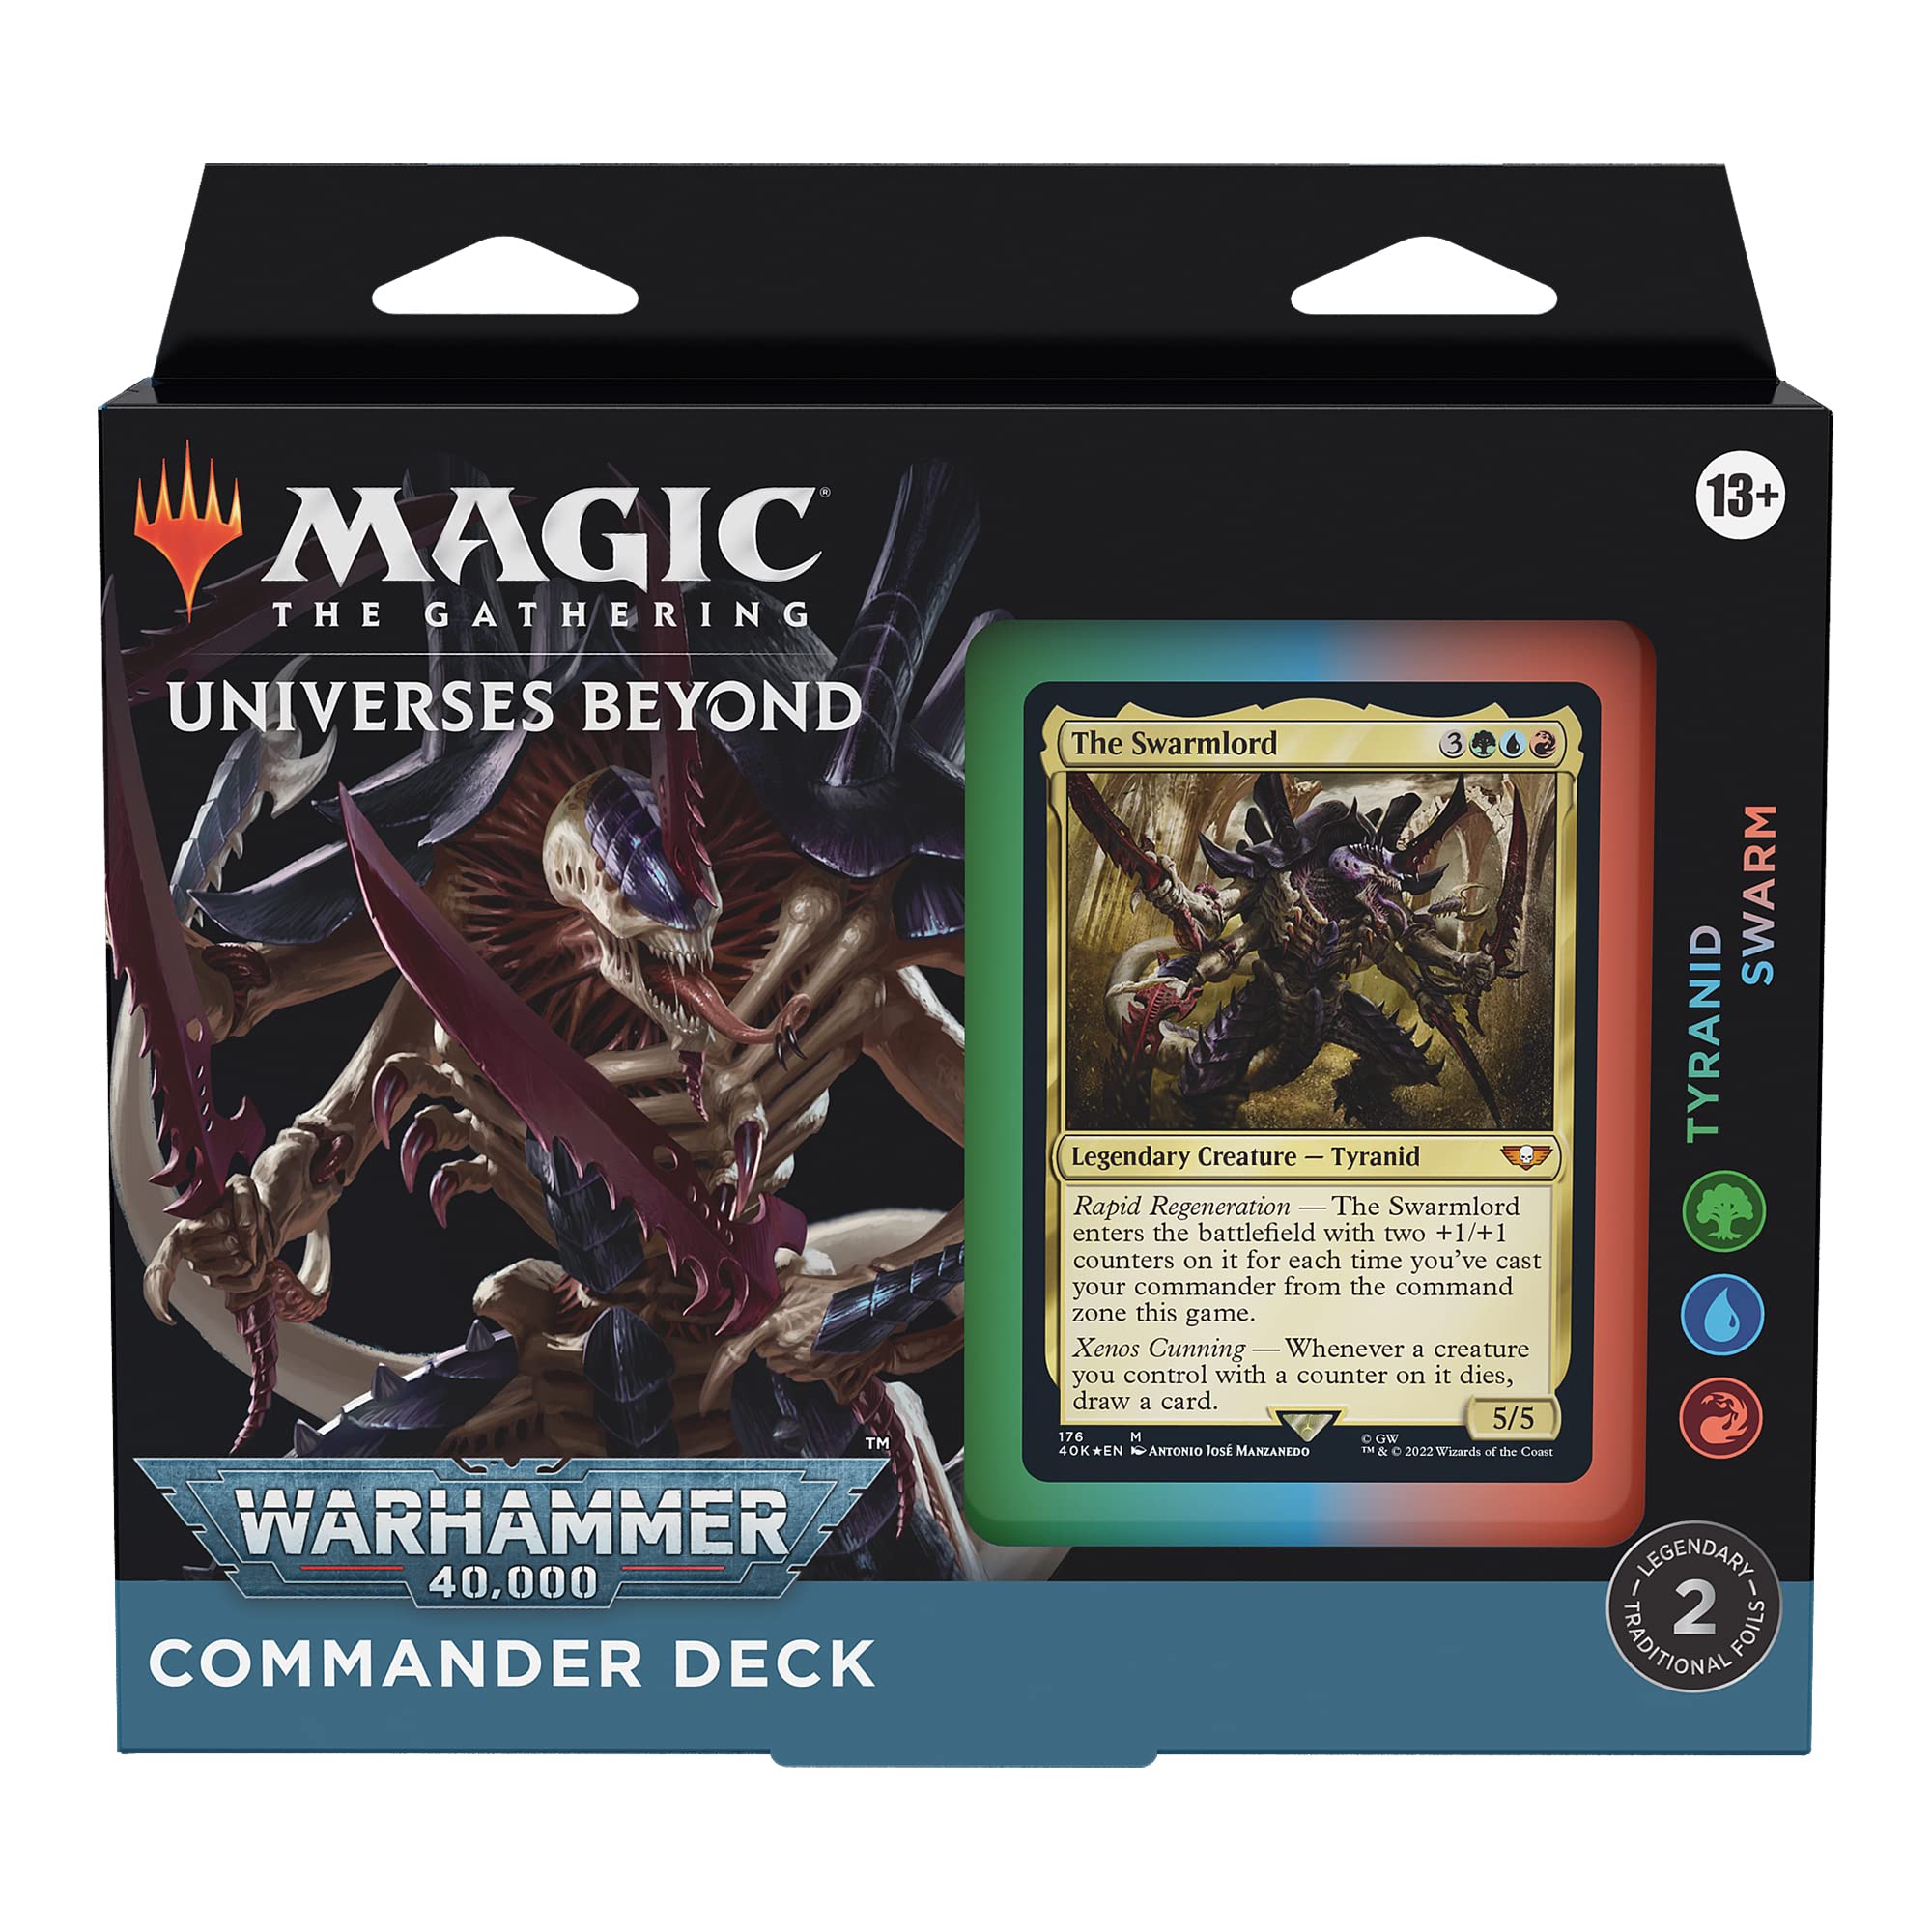 Magic: The Gathering Universes Beyond Warhammer 40,000 Commander Deck Bundle – Includes 1 The Ruinous Powers, 1 Necron Dynasties, 1 Forces of the Imperium, and 1 Tyranid Swarm